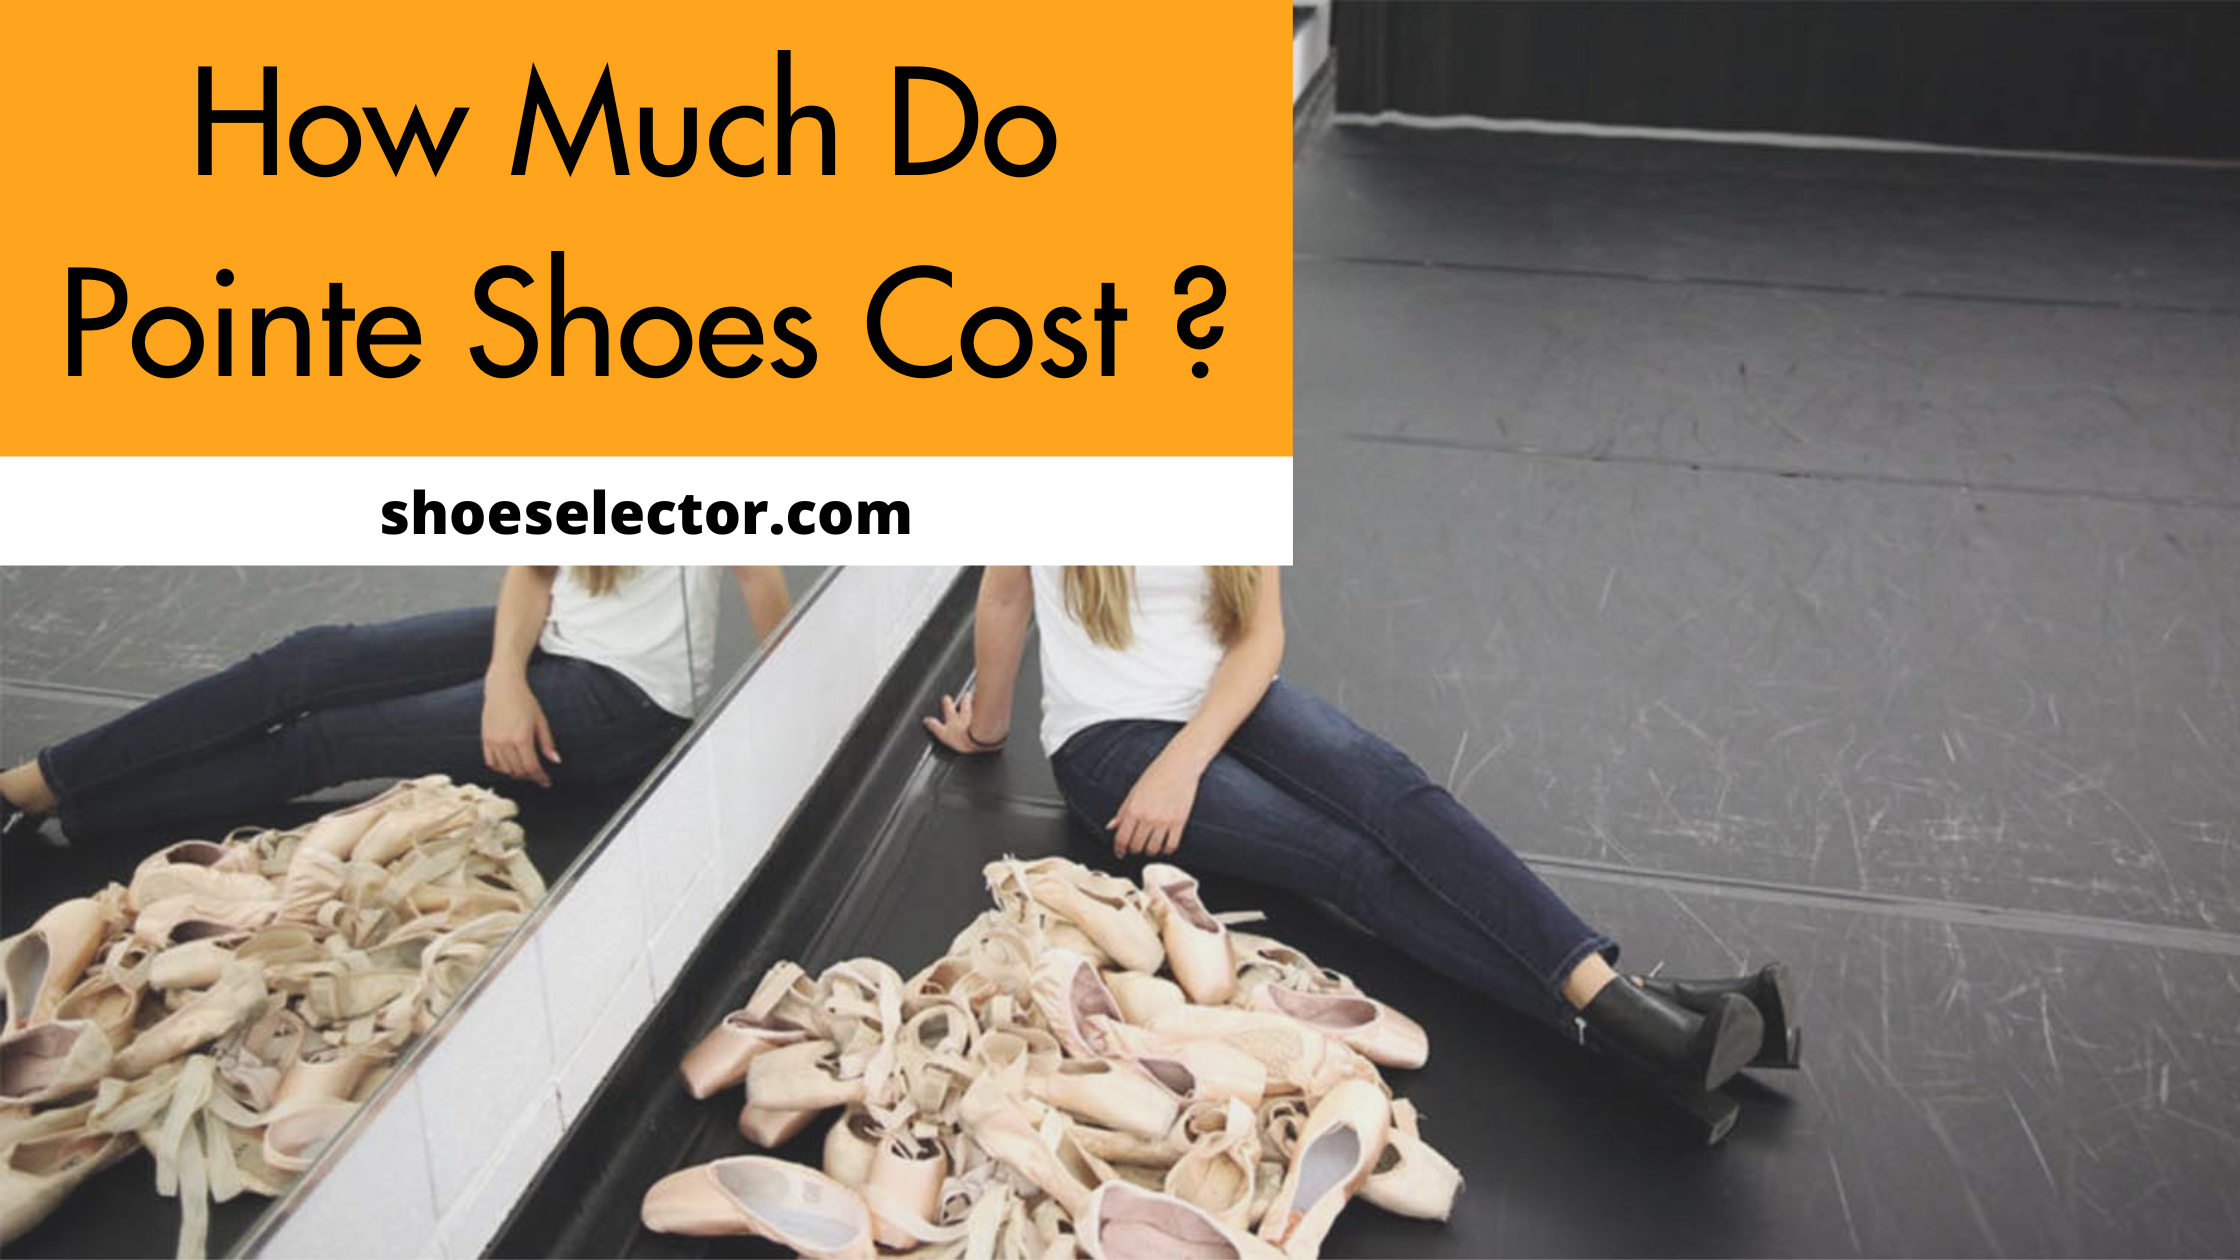 How Much Do Pointe Shoes Cost? - Complete Guide